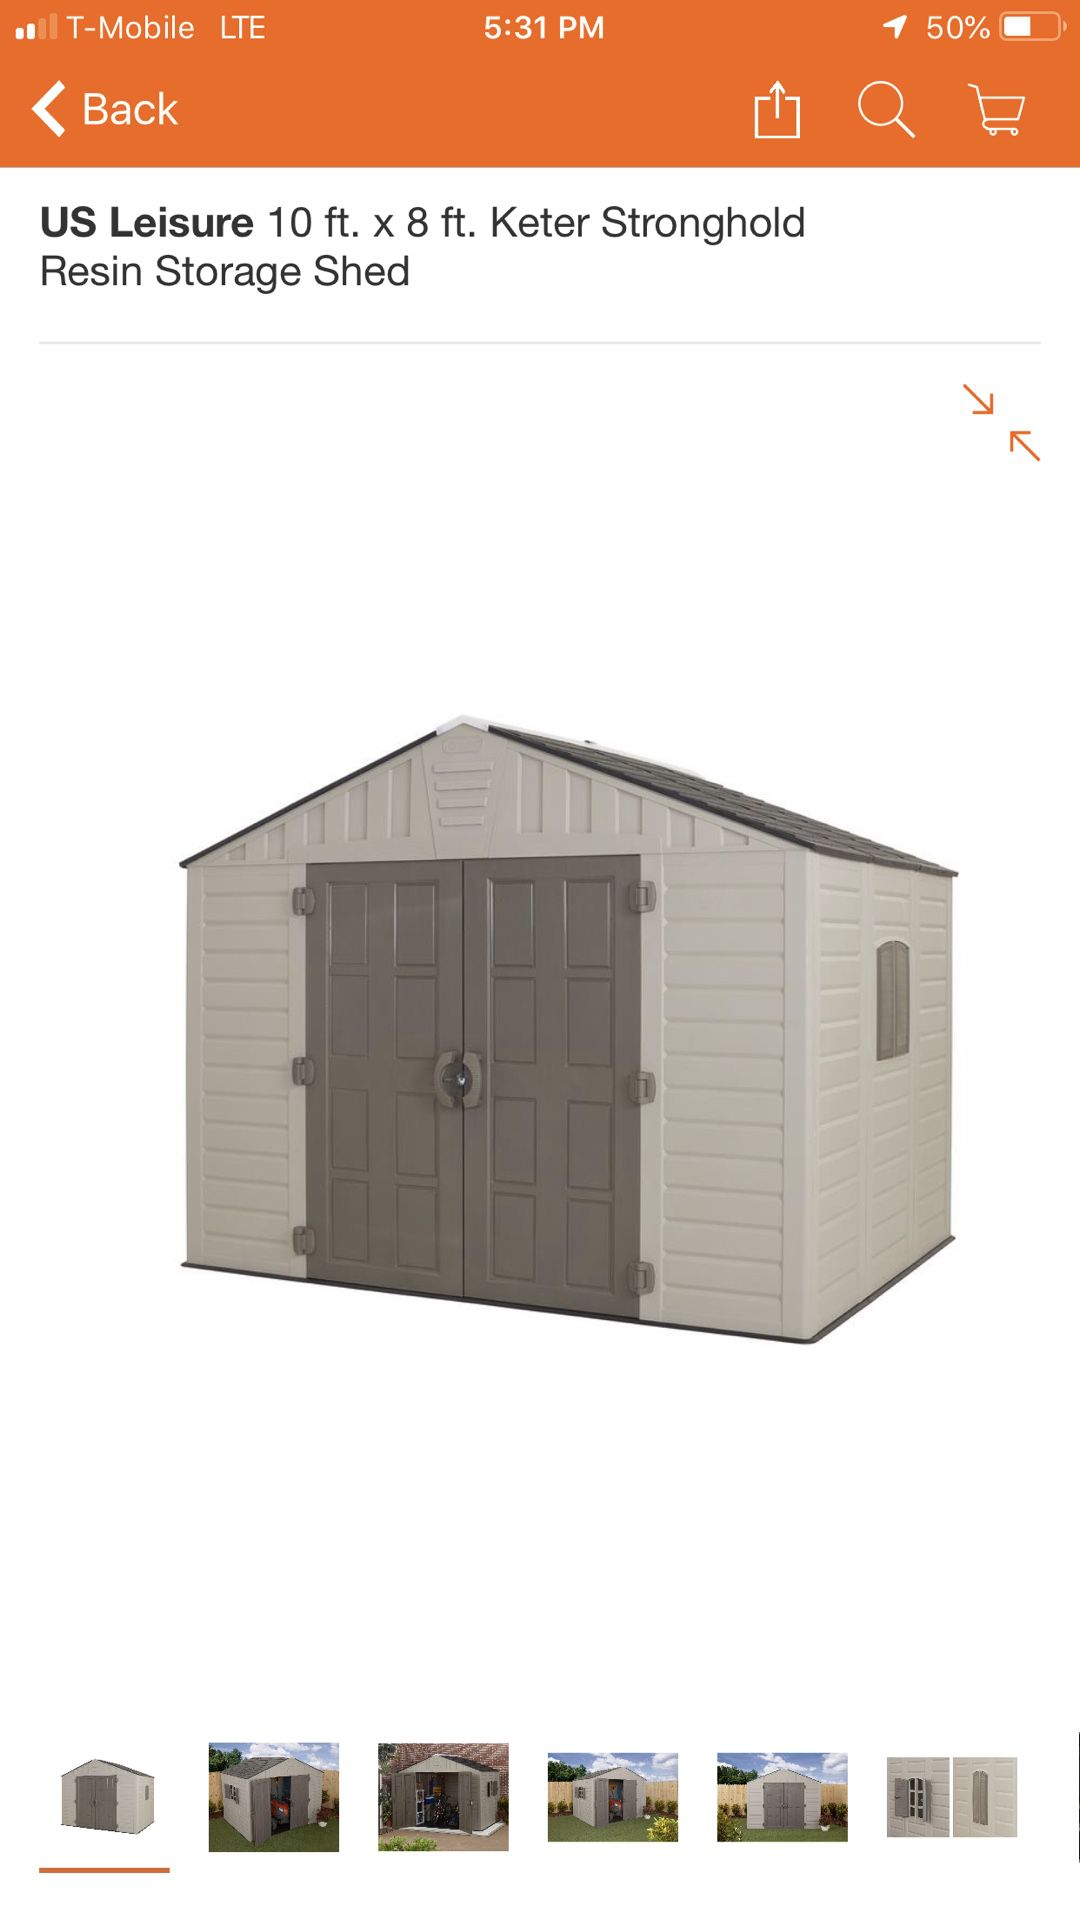 US Leisure 10 ft. x 8 ft. Keter Stronghold Resin Storage Shed